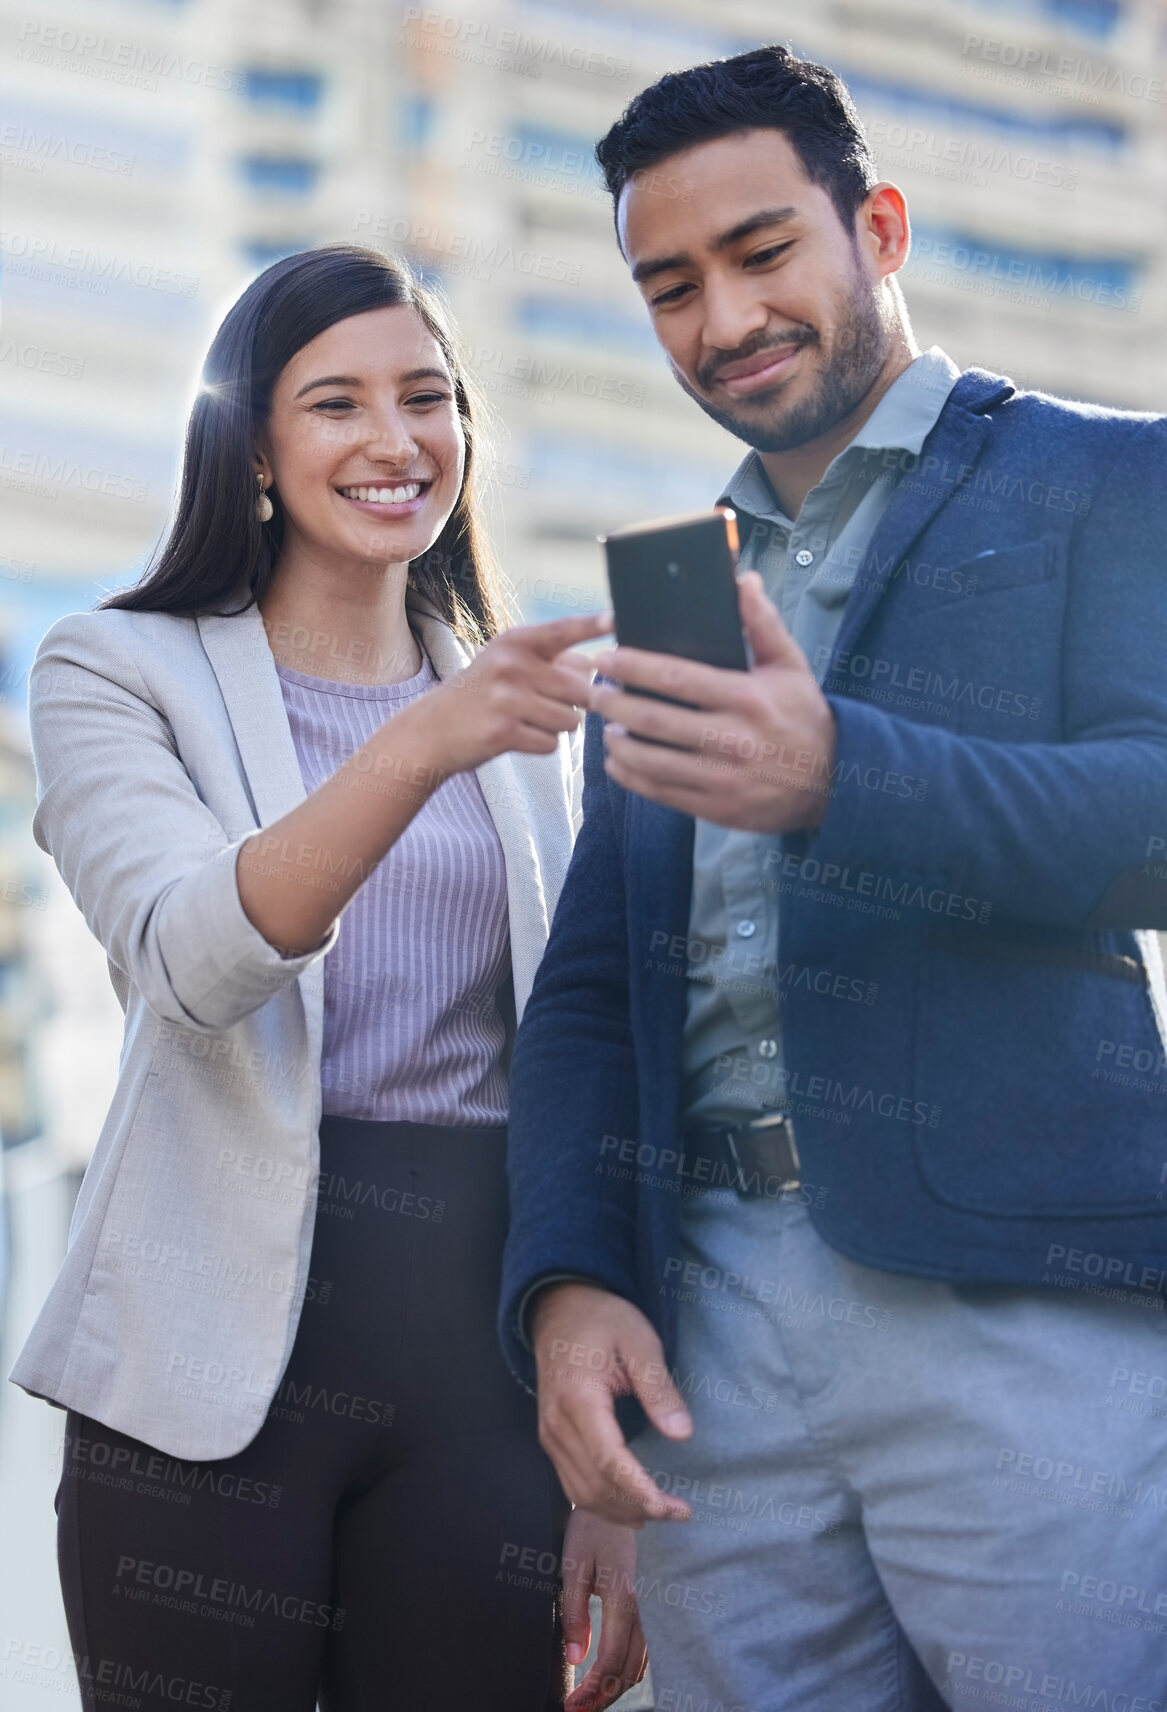 Buy stock photo Phone, business people and team outdoor in a city with internet connection for social media. A happy man and woman together on urban background with smartphone for networking, communication or app